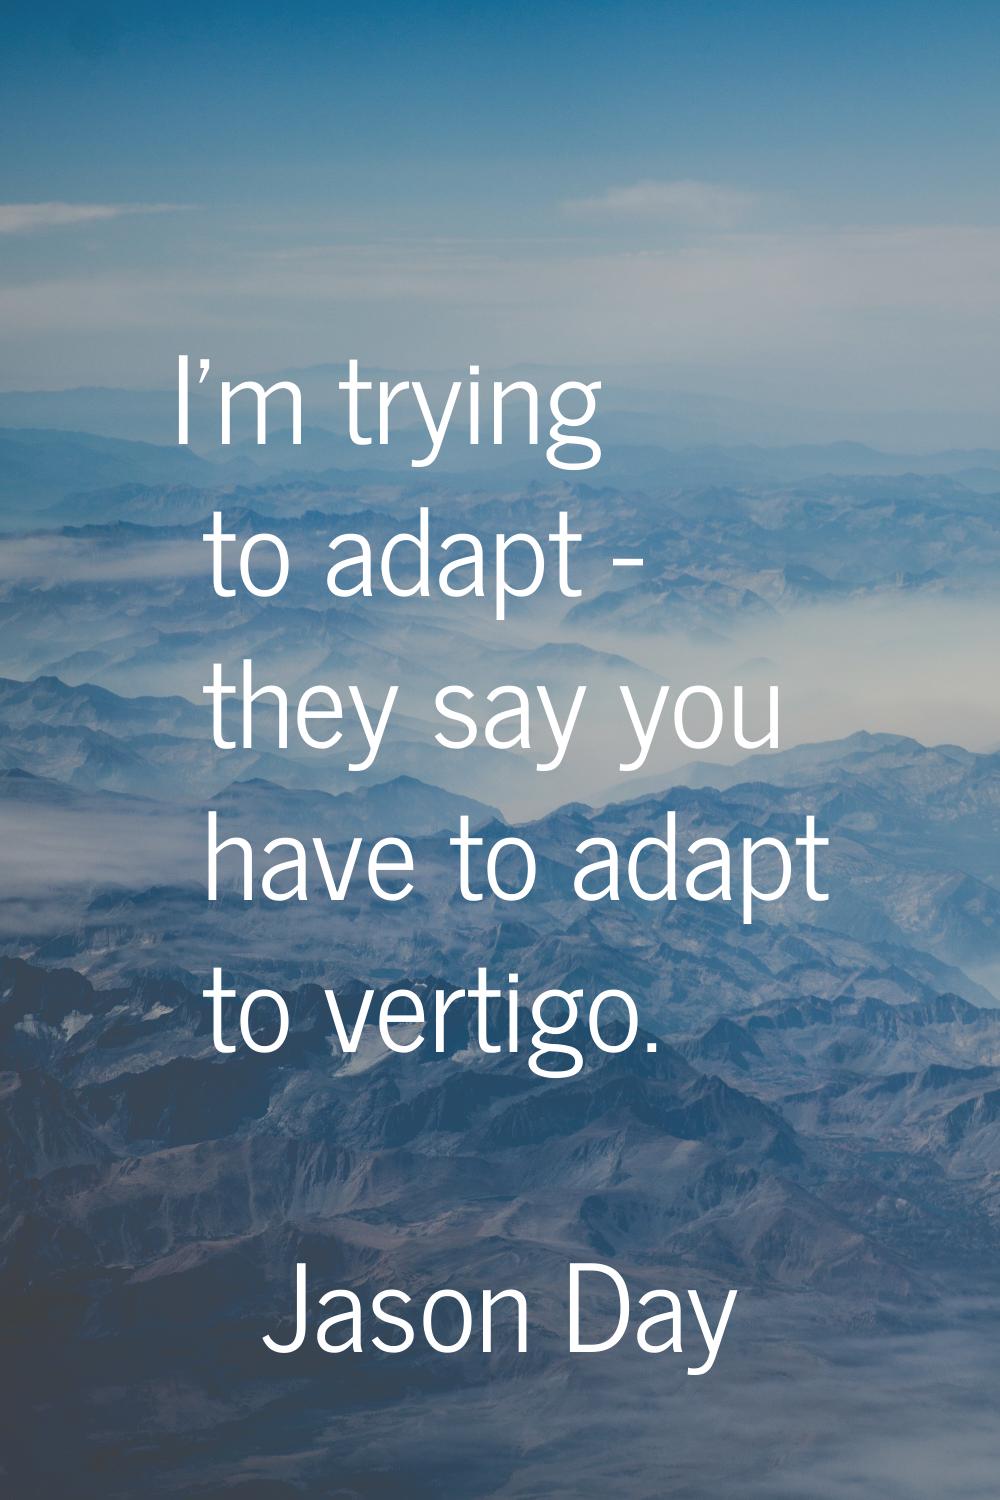 I'm trying to adapt - they say you have to adapt to vertigo.